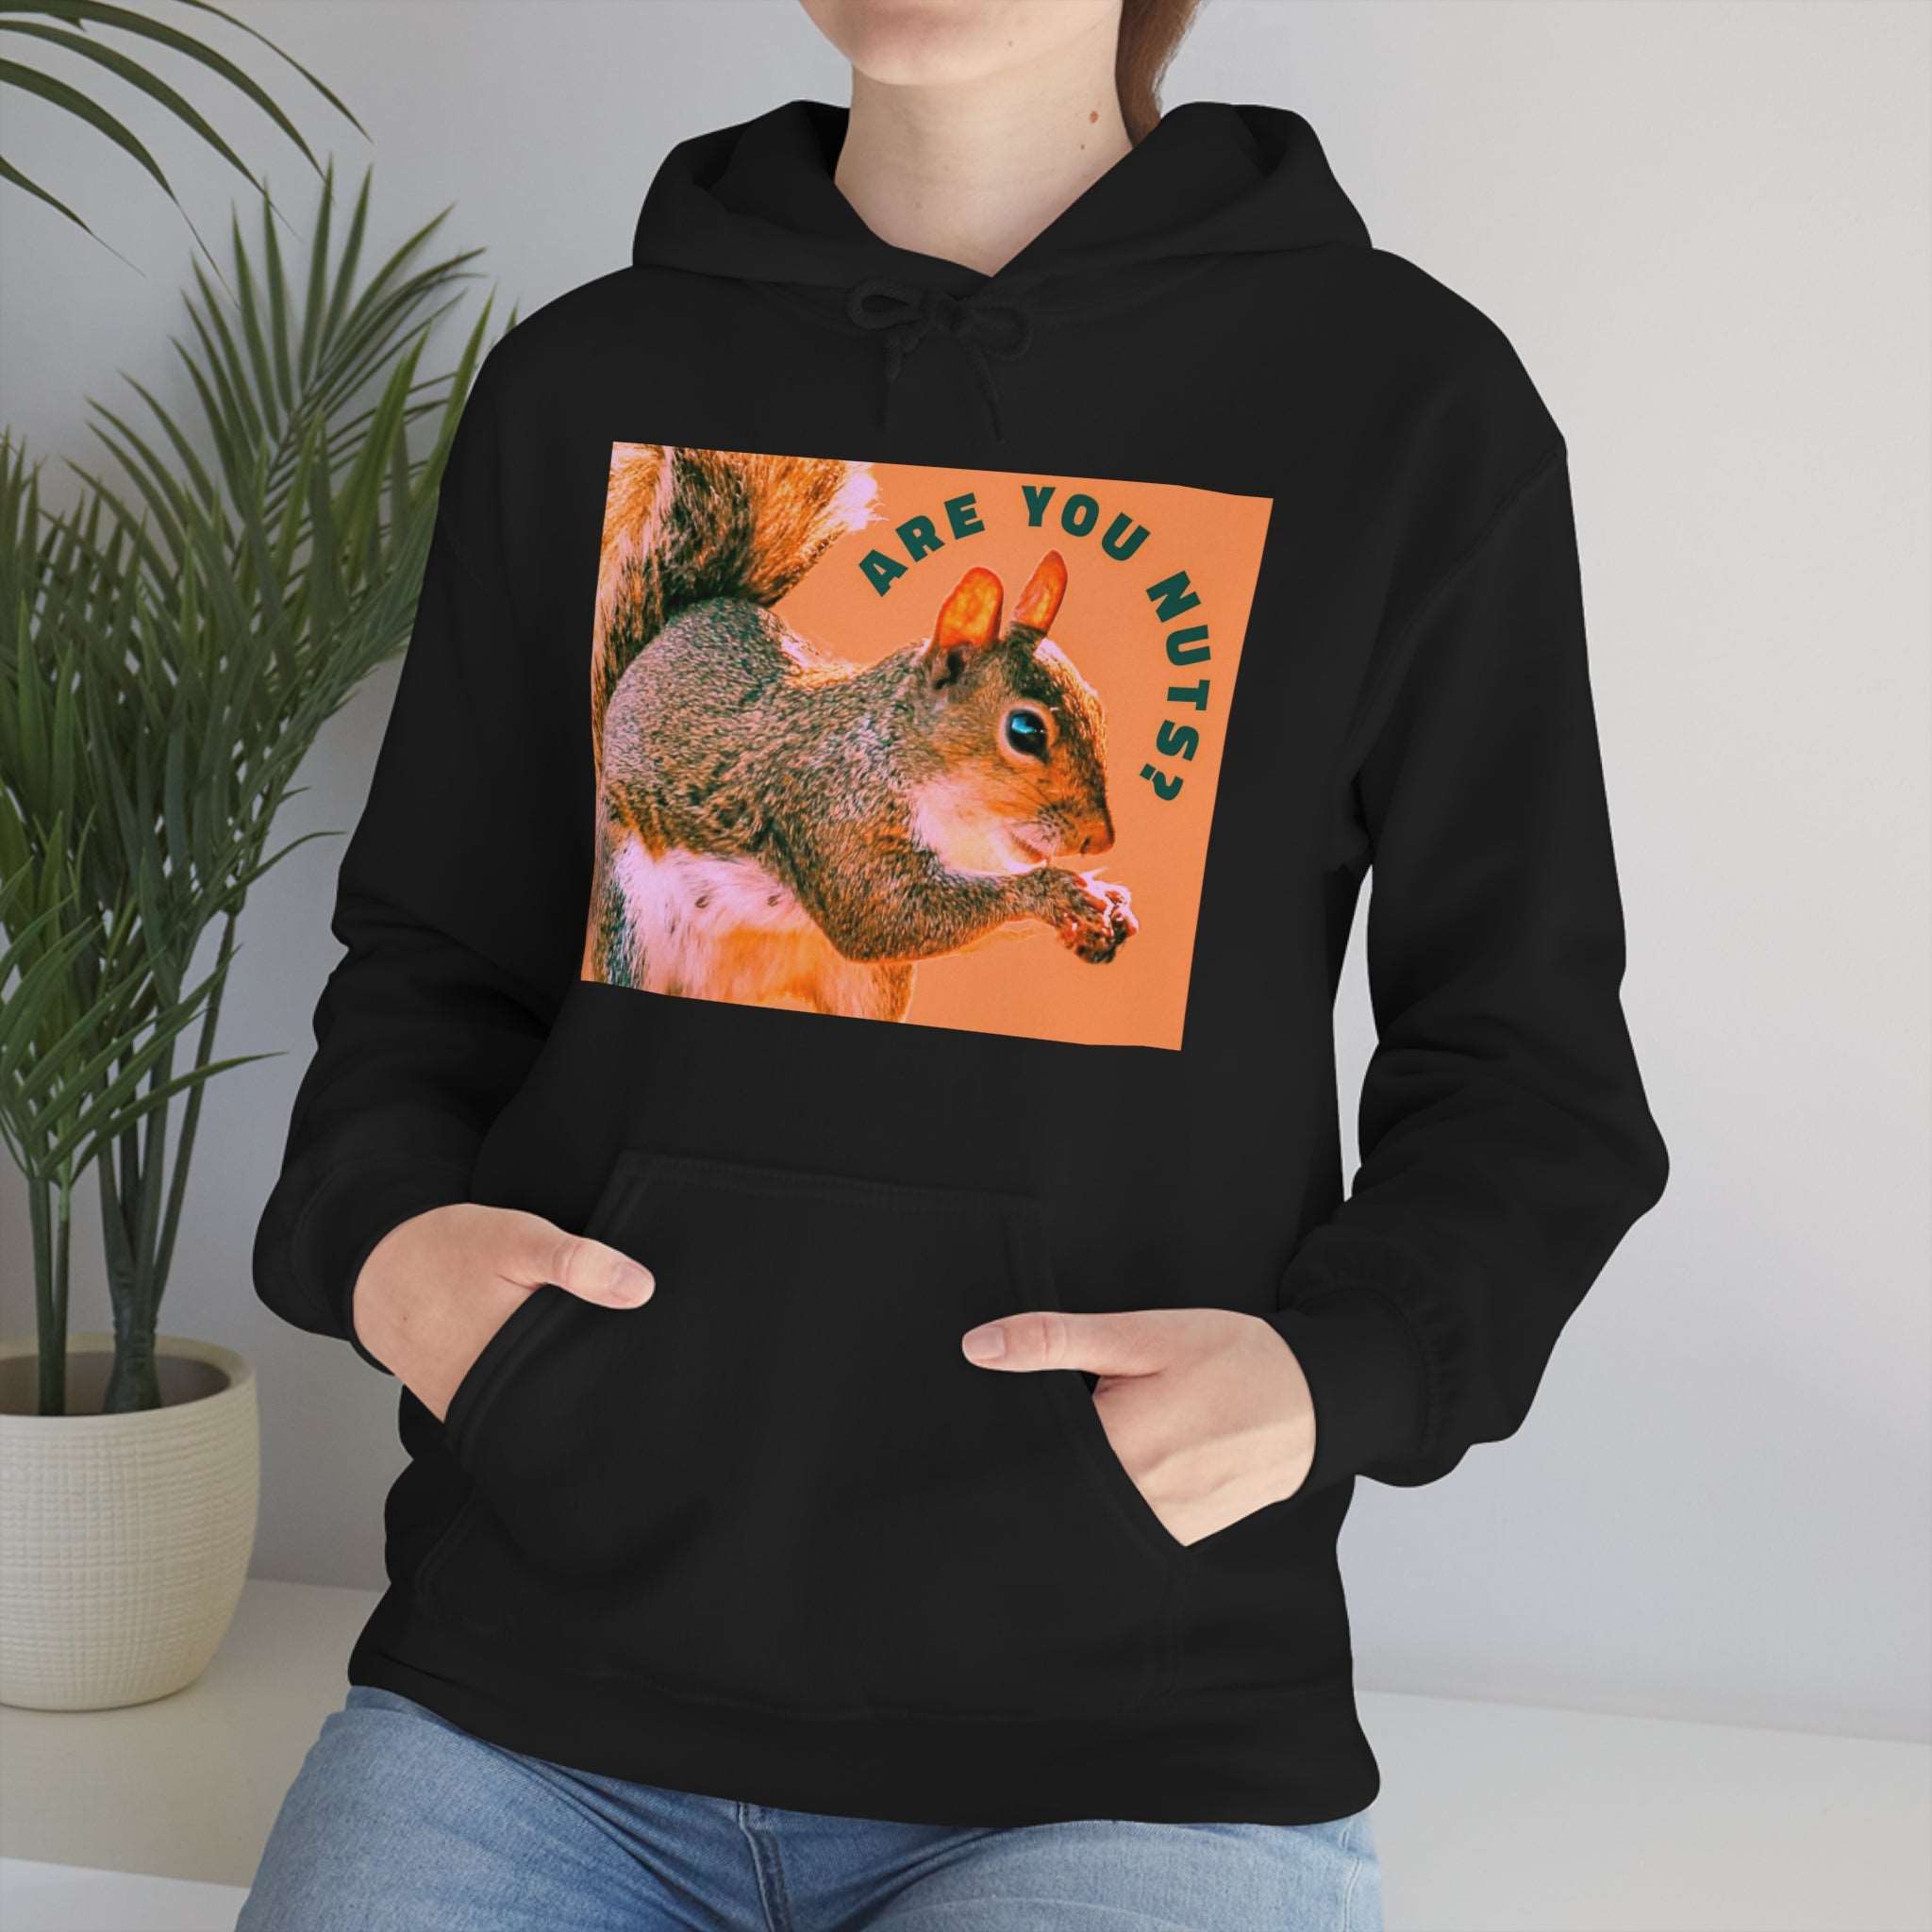 Are you Nuts? Funny Squirrel Unisex Hooded Sweatshirt up to 5XL